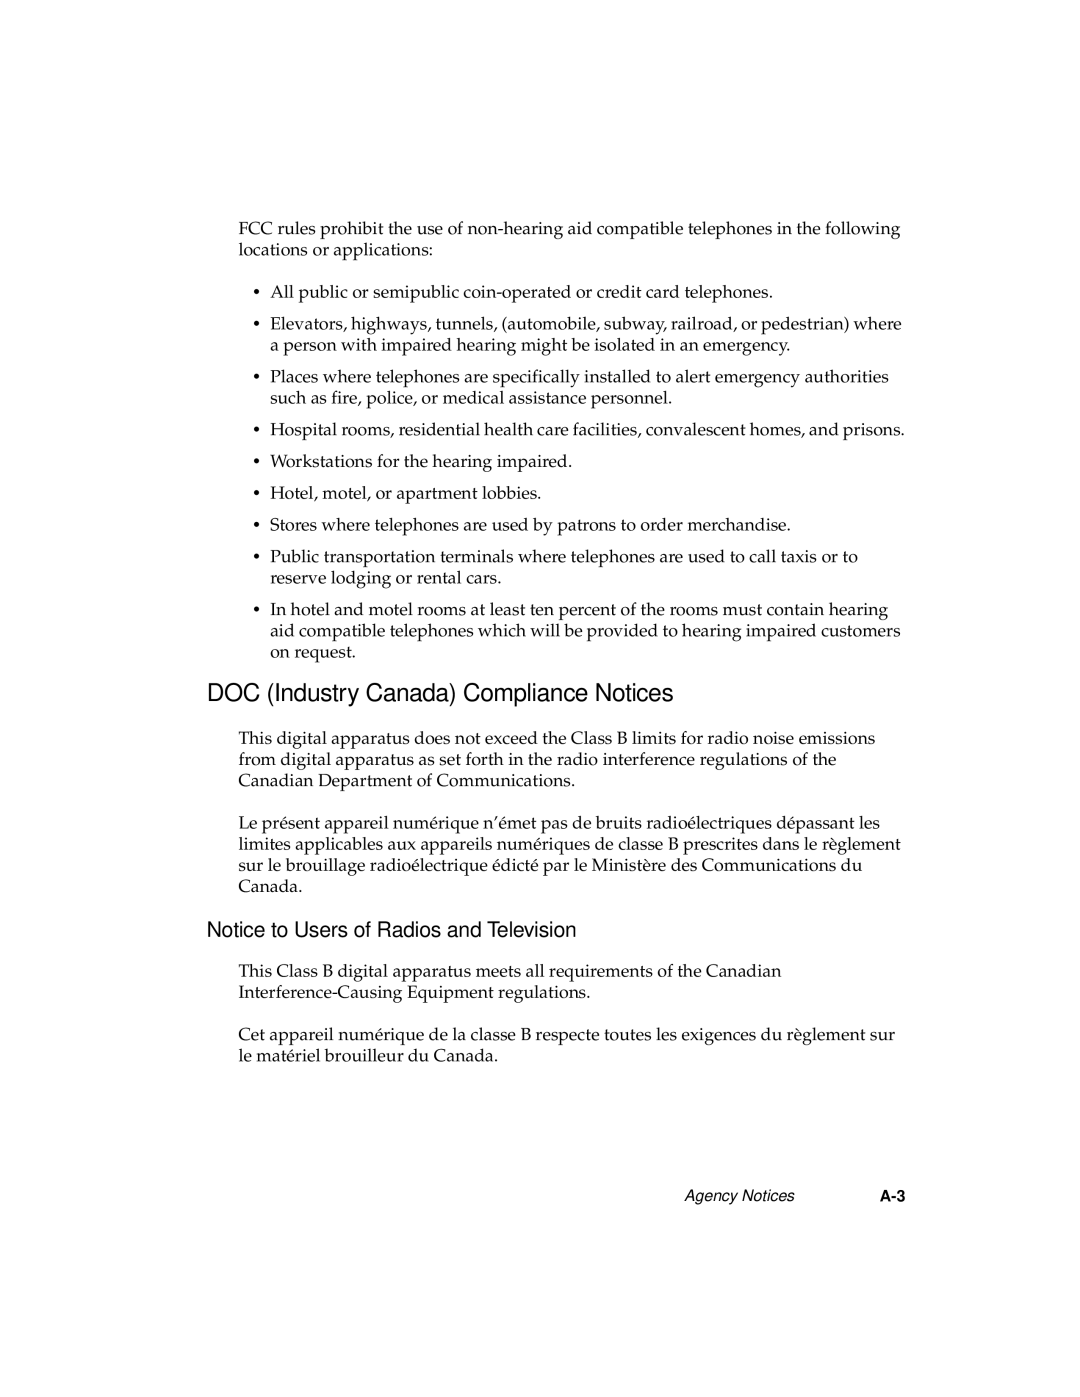 Fujitsu 1600 manual DOC Industry Canada Compliance Notices, Notice to Users of Radios and Television 